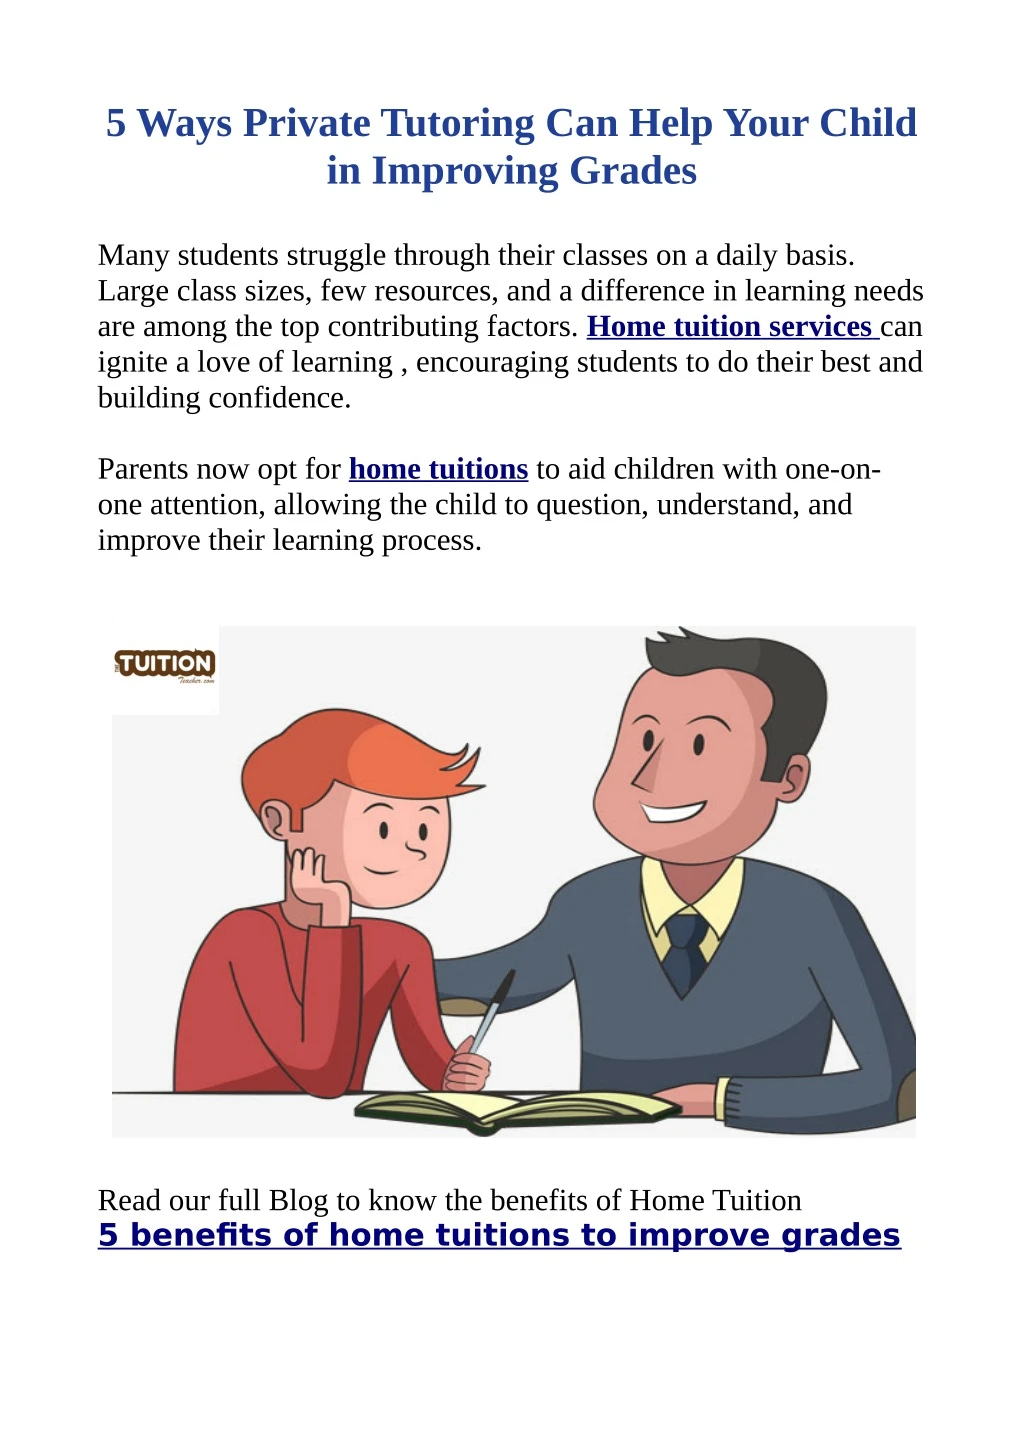 5 ways private tutoring can help your child